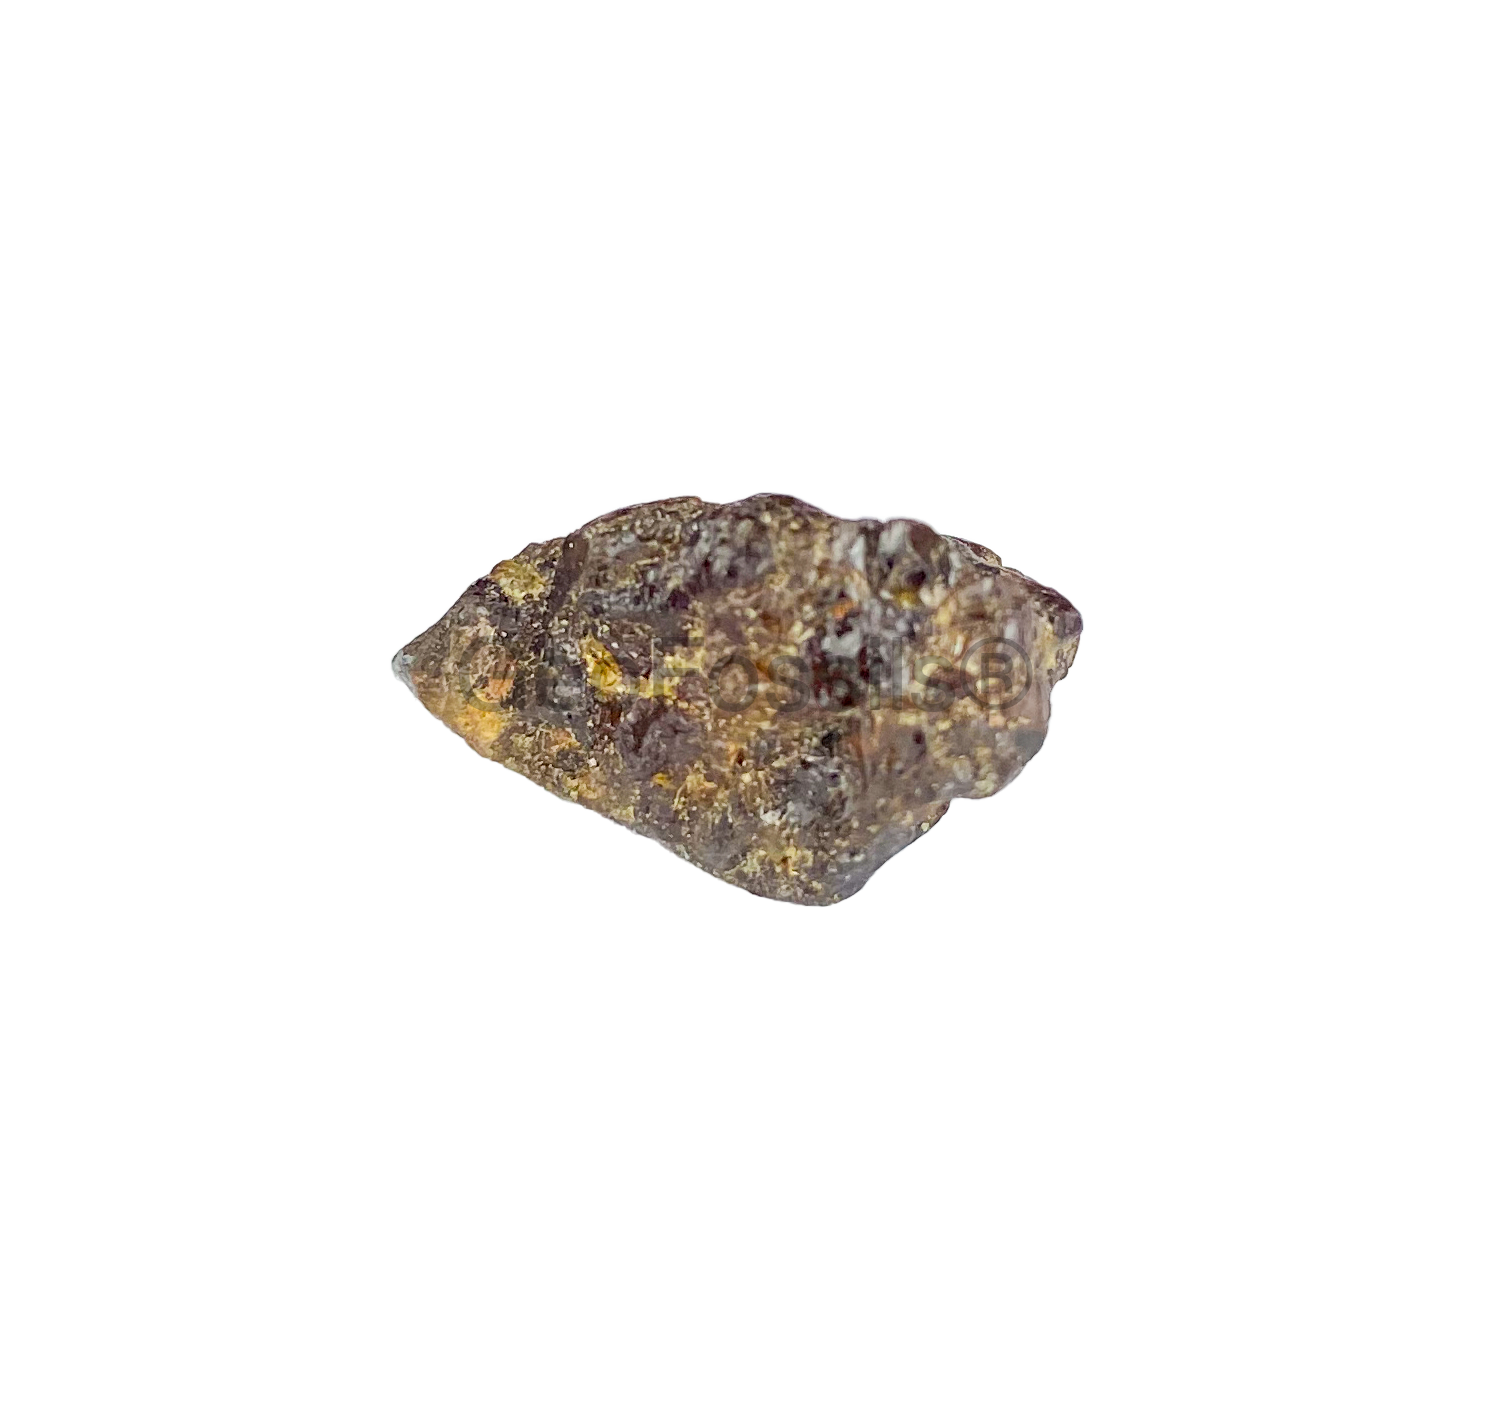 Geofossils Rare Earth Element - Bastnasite 2gms approx